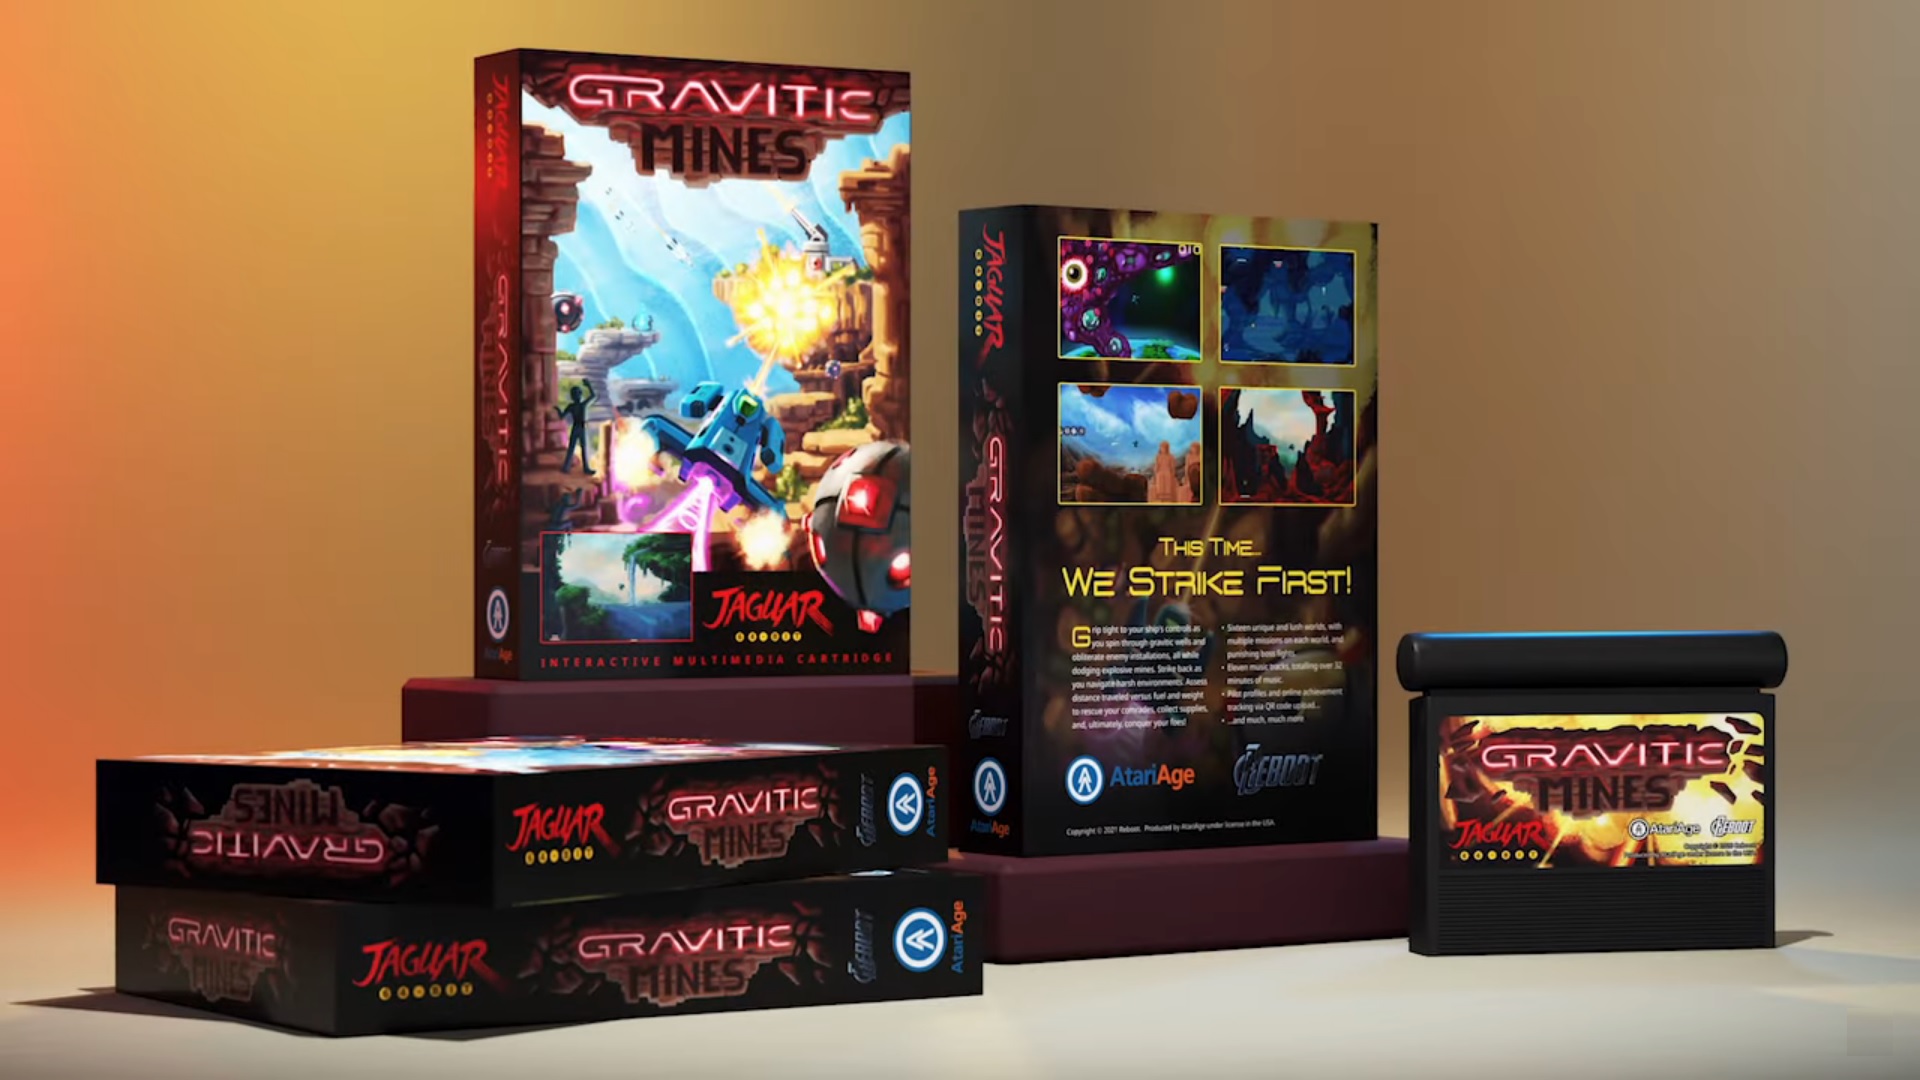 Gravitic Mines for Atari Jaguar is now available